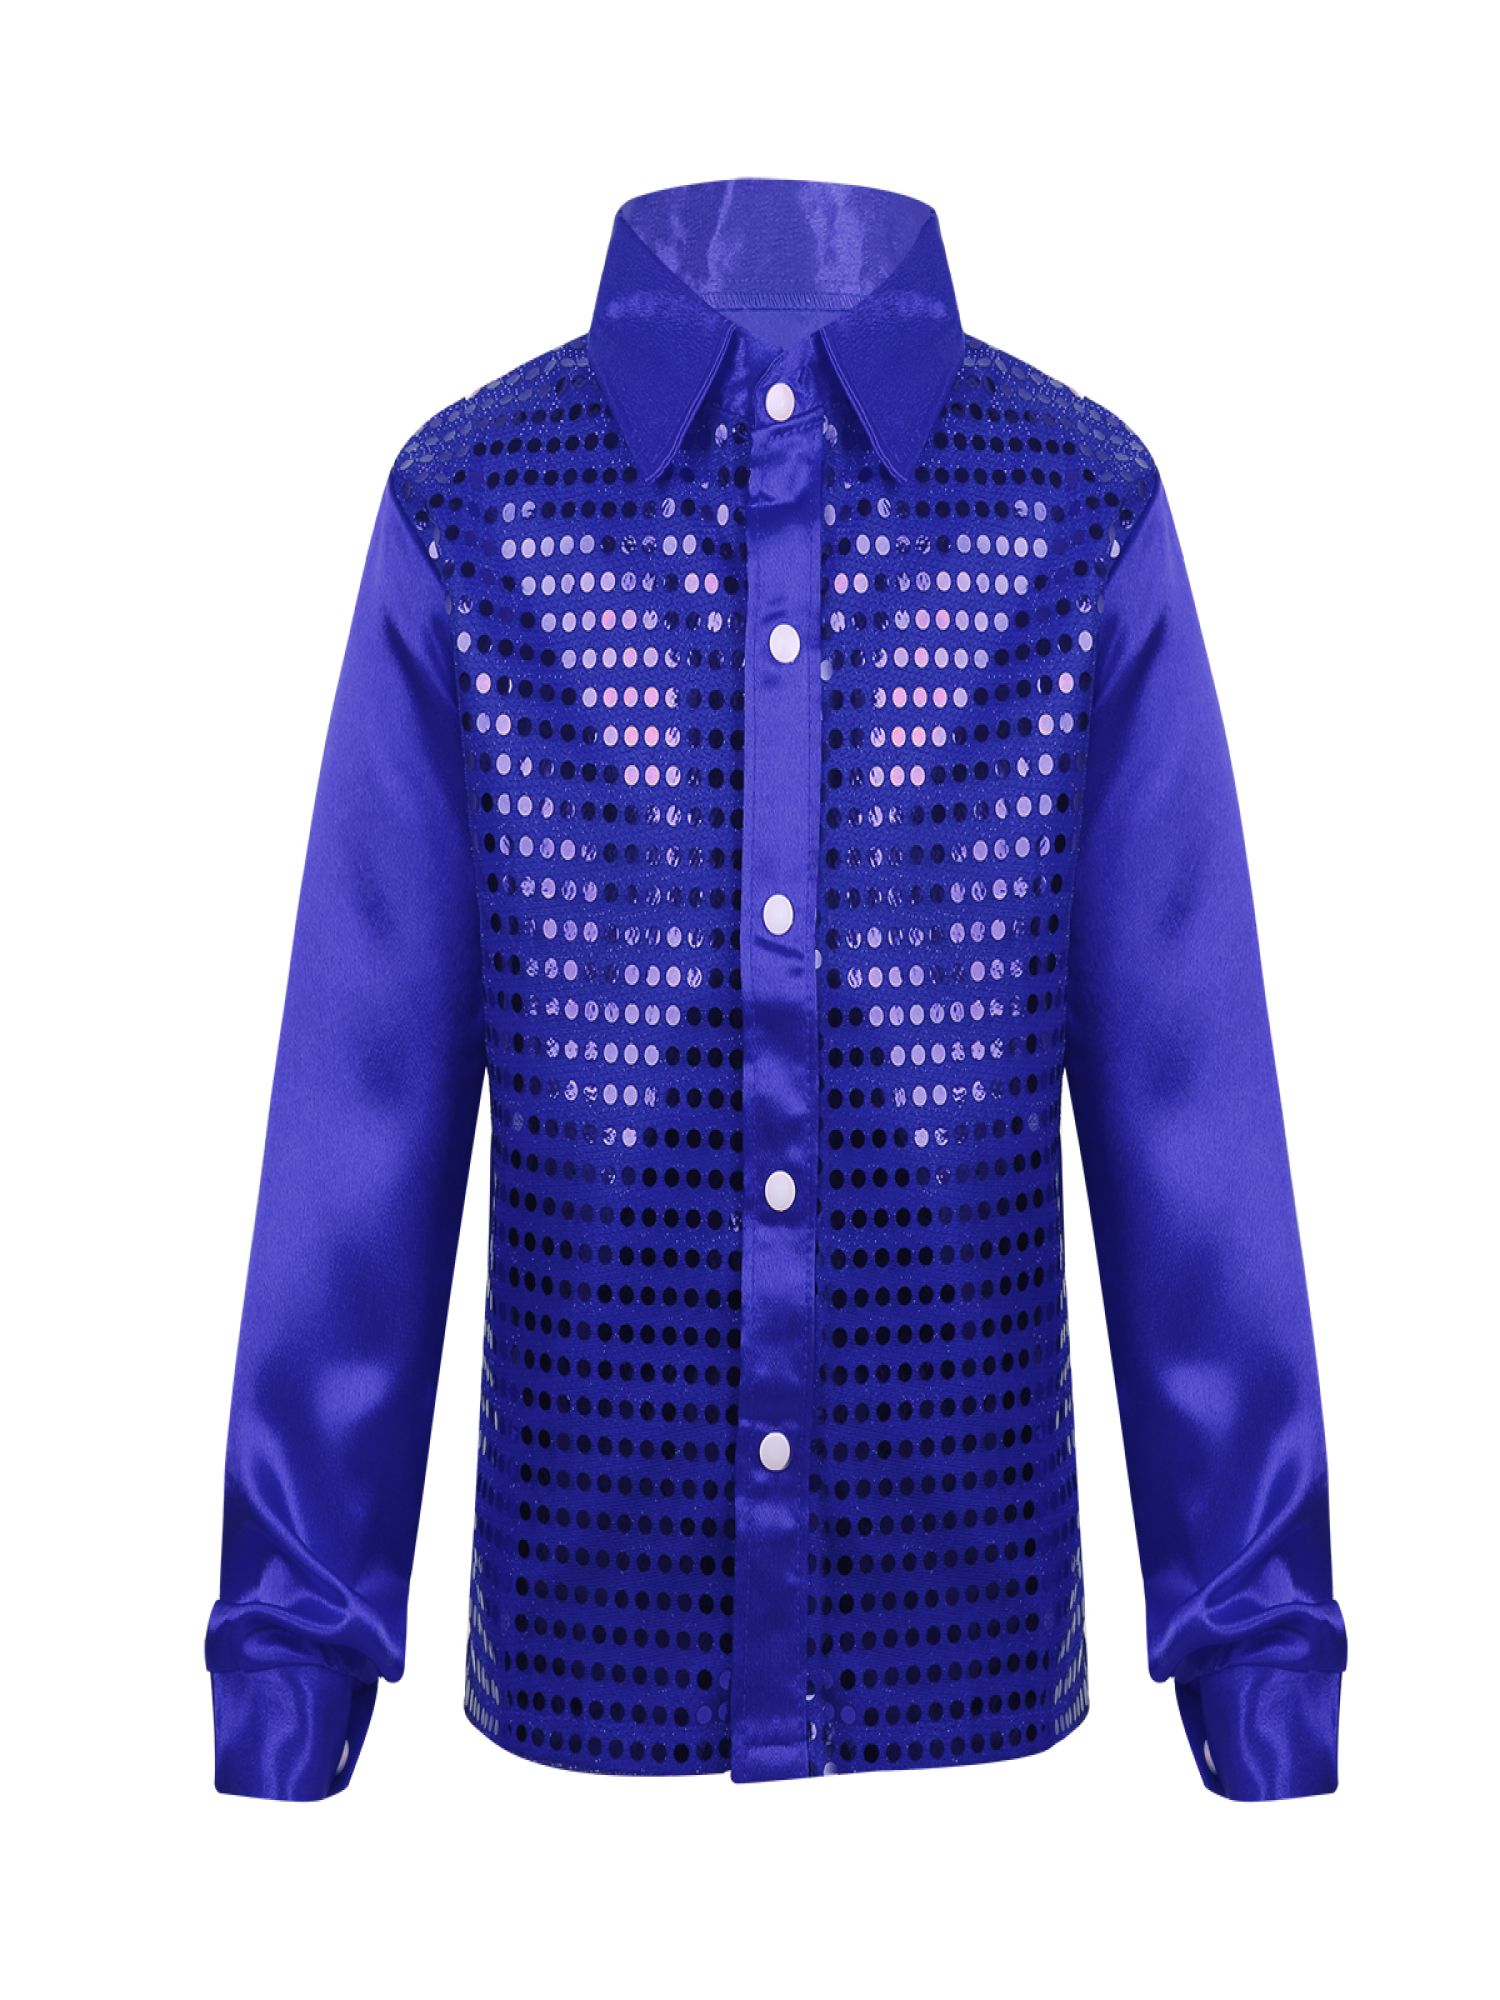 YEAHDOR Kids Boys Sparkly Sequins Lapel Collar Shirt Long Sleeve Tops for Jazz Latin Dance Performance Blue 4-5 - image 1 of 7